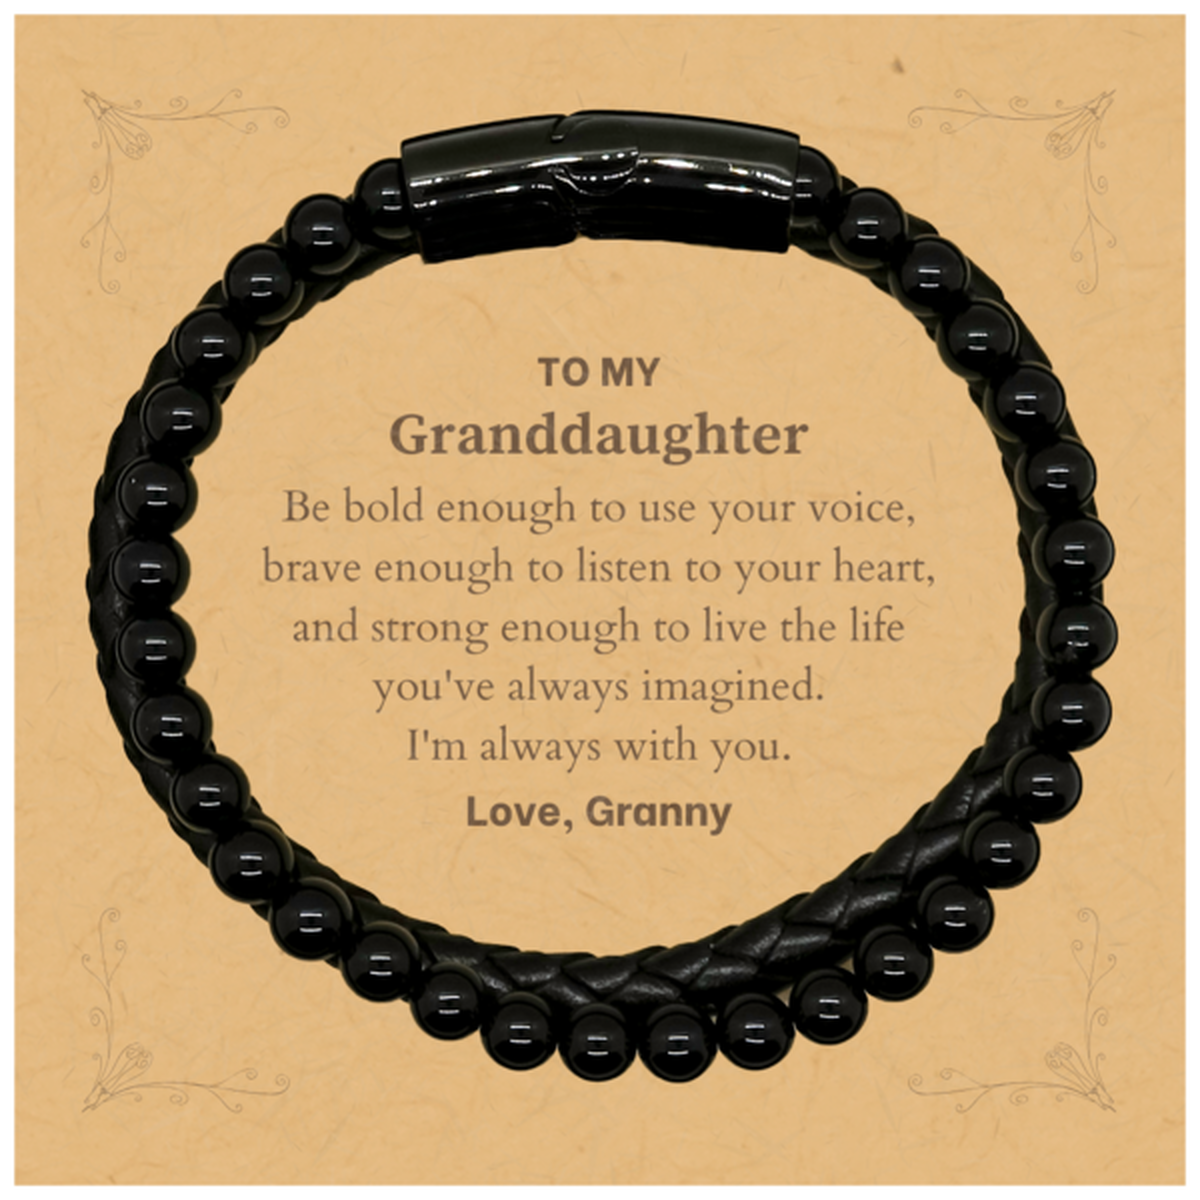 Keepsake Granddaughter Stone Leather Bracelets Gift Idea Graduation Christmas Birthday Granddaughter from Granny, Granddaughter Be bold enough to use your voice, brave enough to listen to your heart. Love, Granny